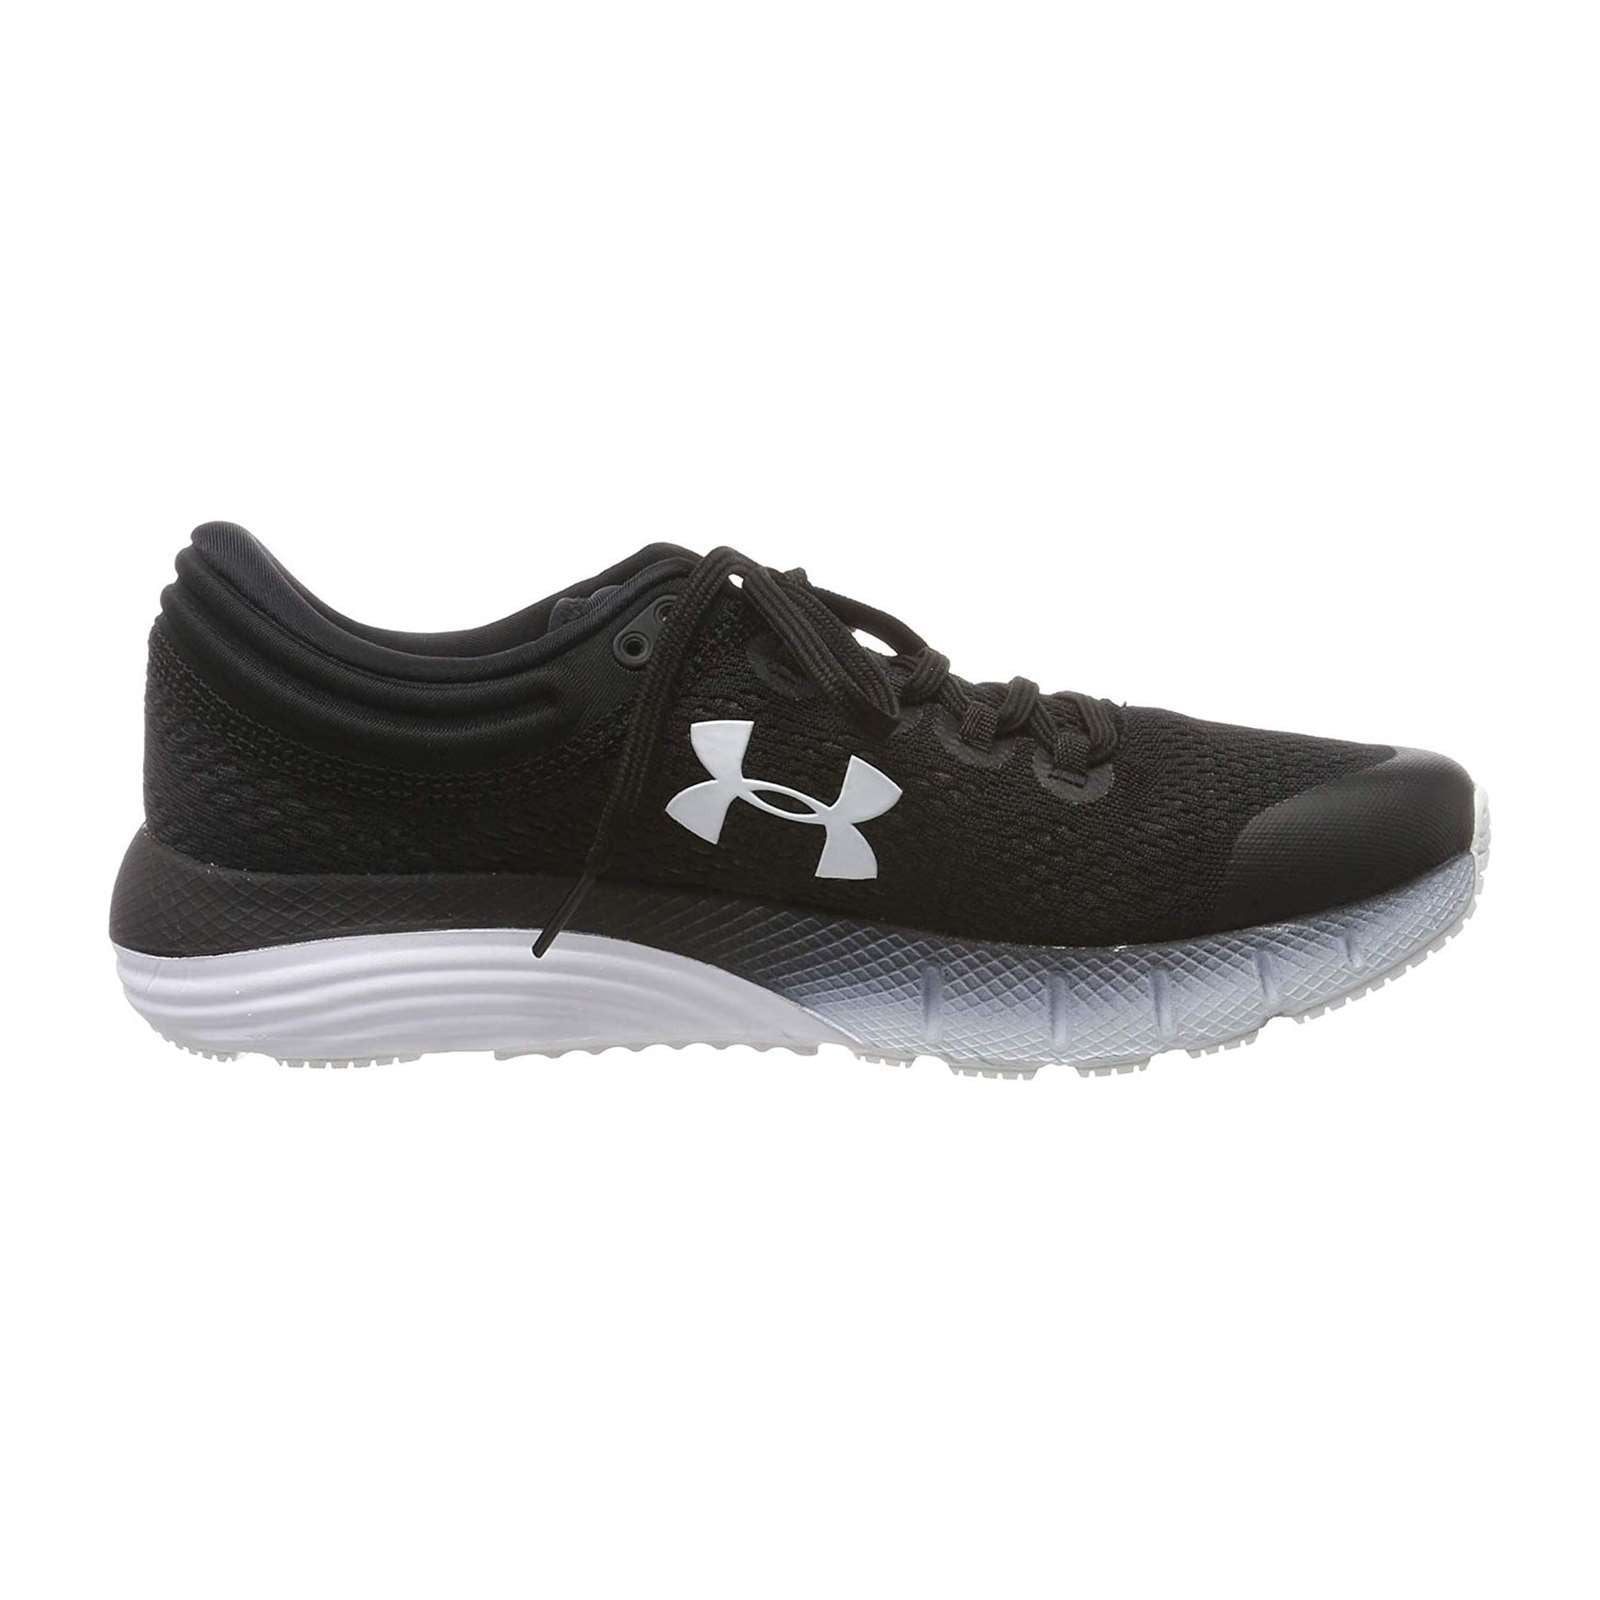 Under Armour - Under Armour Women Charged Bandit 5 Running Shoes - 10 ...